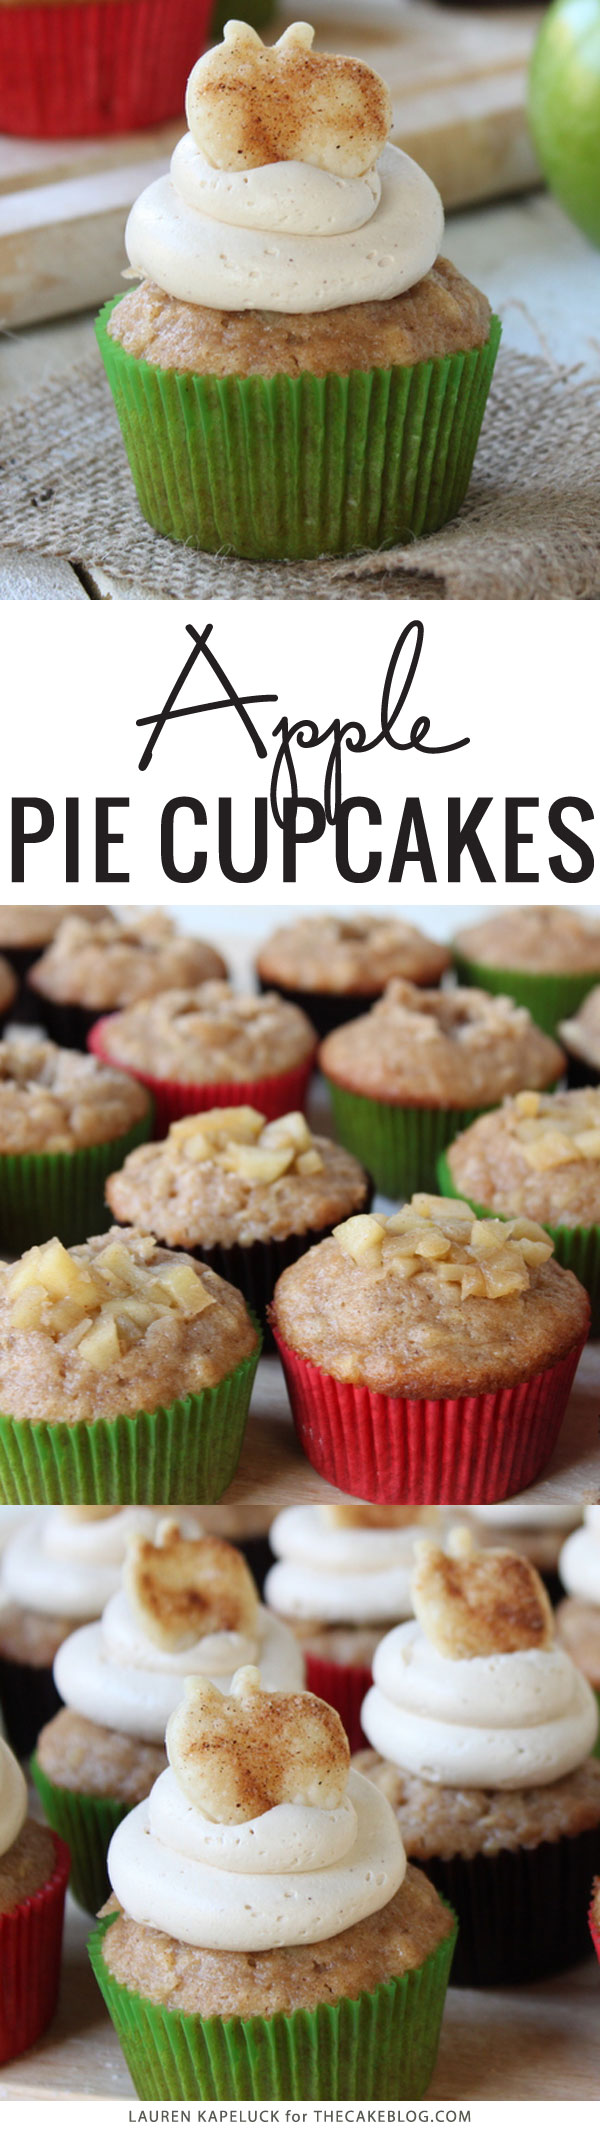 Apple Pie Cupcakes with Brown Sugar Cinnamon Frosting | by Lauren Kapeluck for TheCakeBlog.com